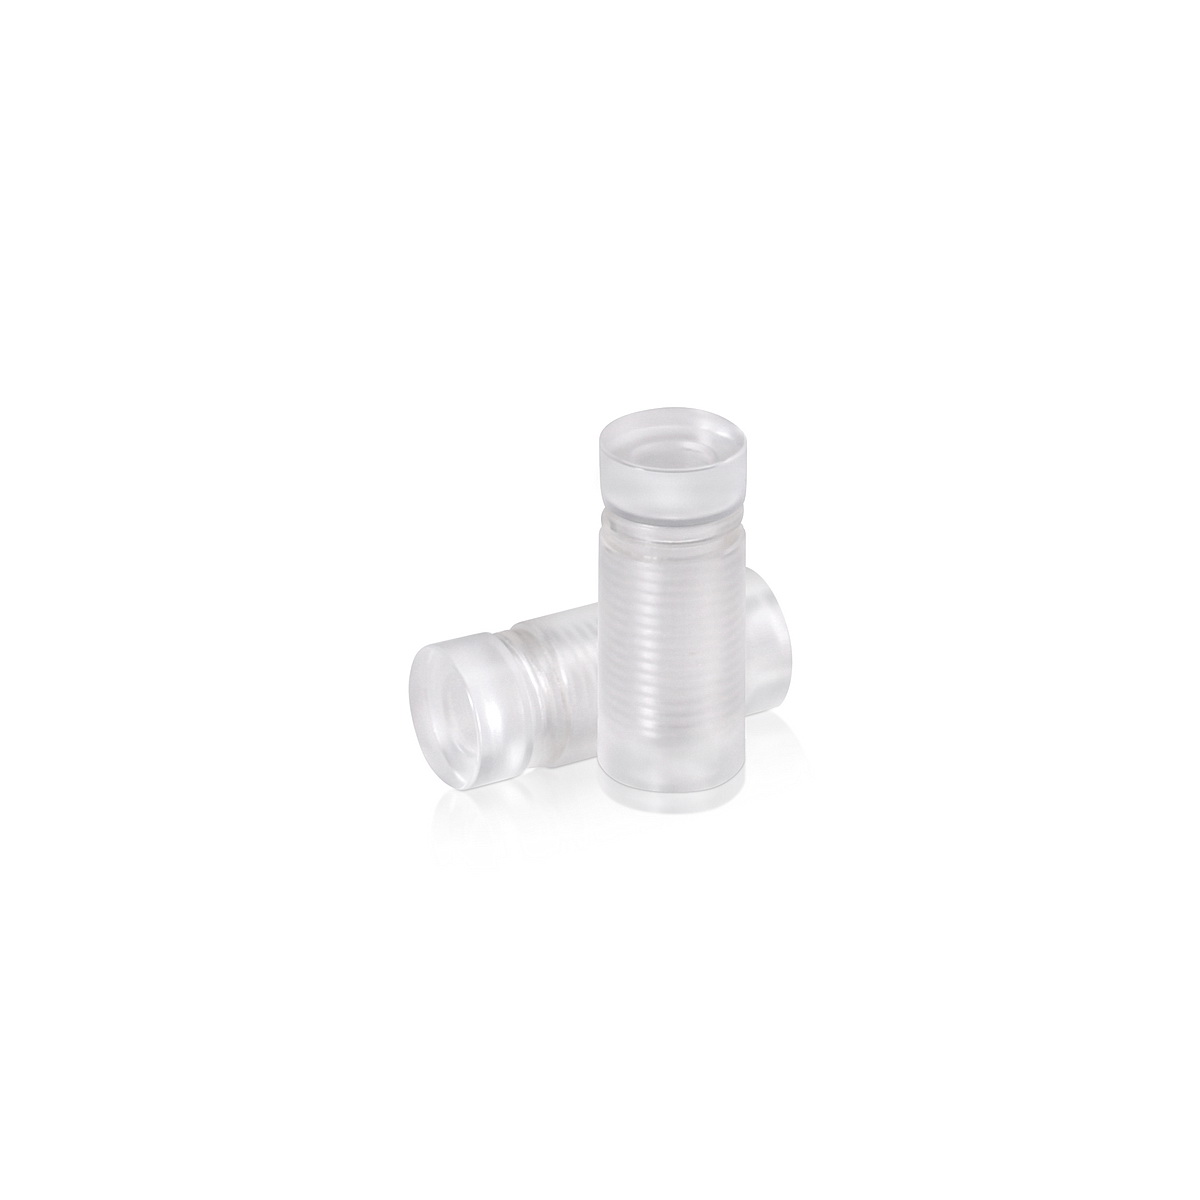 5/8'' Diameter X 2-1/2'' Barrel Length, Clear Acrylic Standoff. Easy Fasten Standoff (For Inside Use Only) Tamper Proof [Required Material Hole Size: 3/8'']